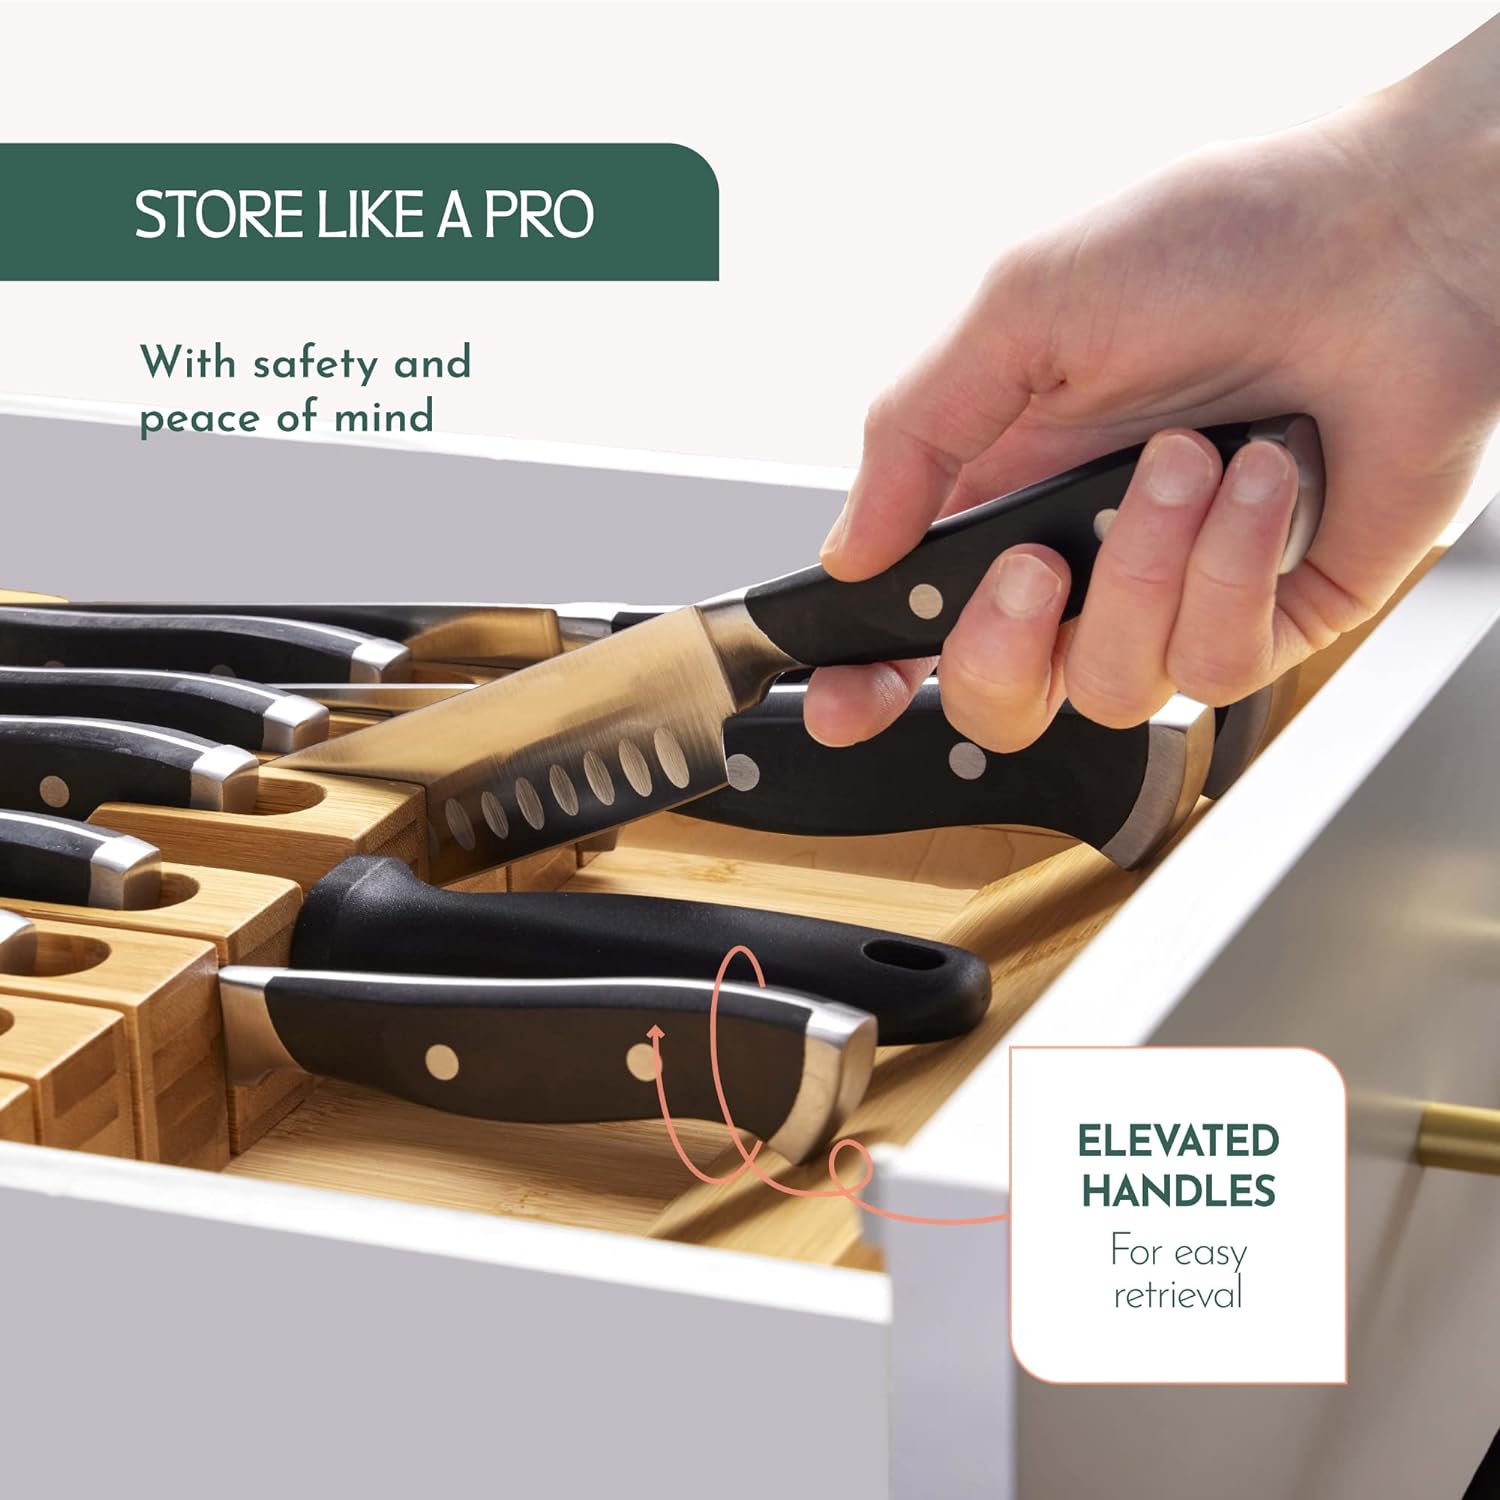 High-Grade 100% Bamboo Knife Drawer Organizer - 16 Knife Slots Plus a Sharpener Slot, Knife Organizer for Kitchen Organization, Durable, Secured, Practical, Eco-Friendly, Knife Block without Knives. 1.9"-15"-15"